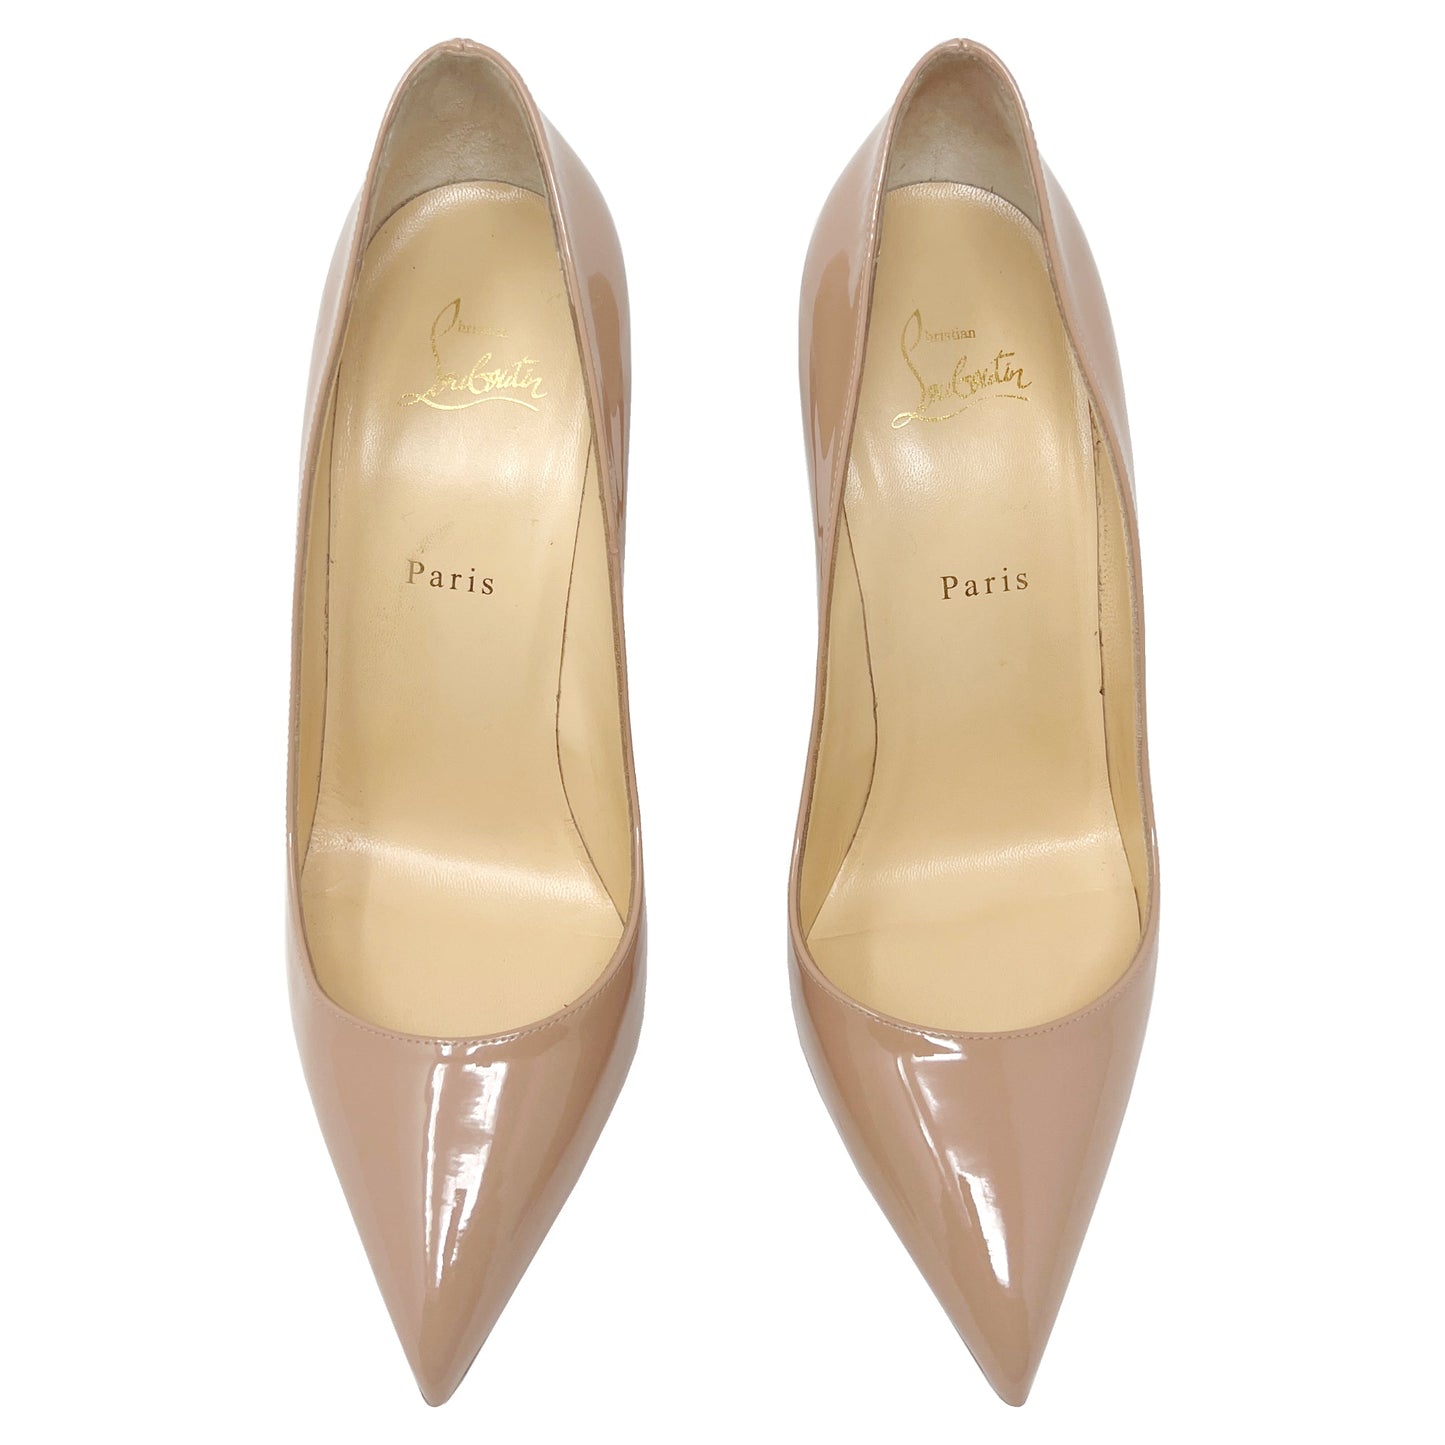 Christian Louboutin Pigalle Follies 100 Nude Tan Patent Leather Pointed Stiletto Pumps Heels